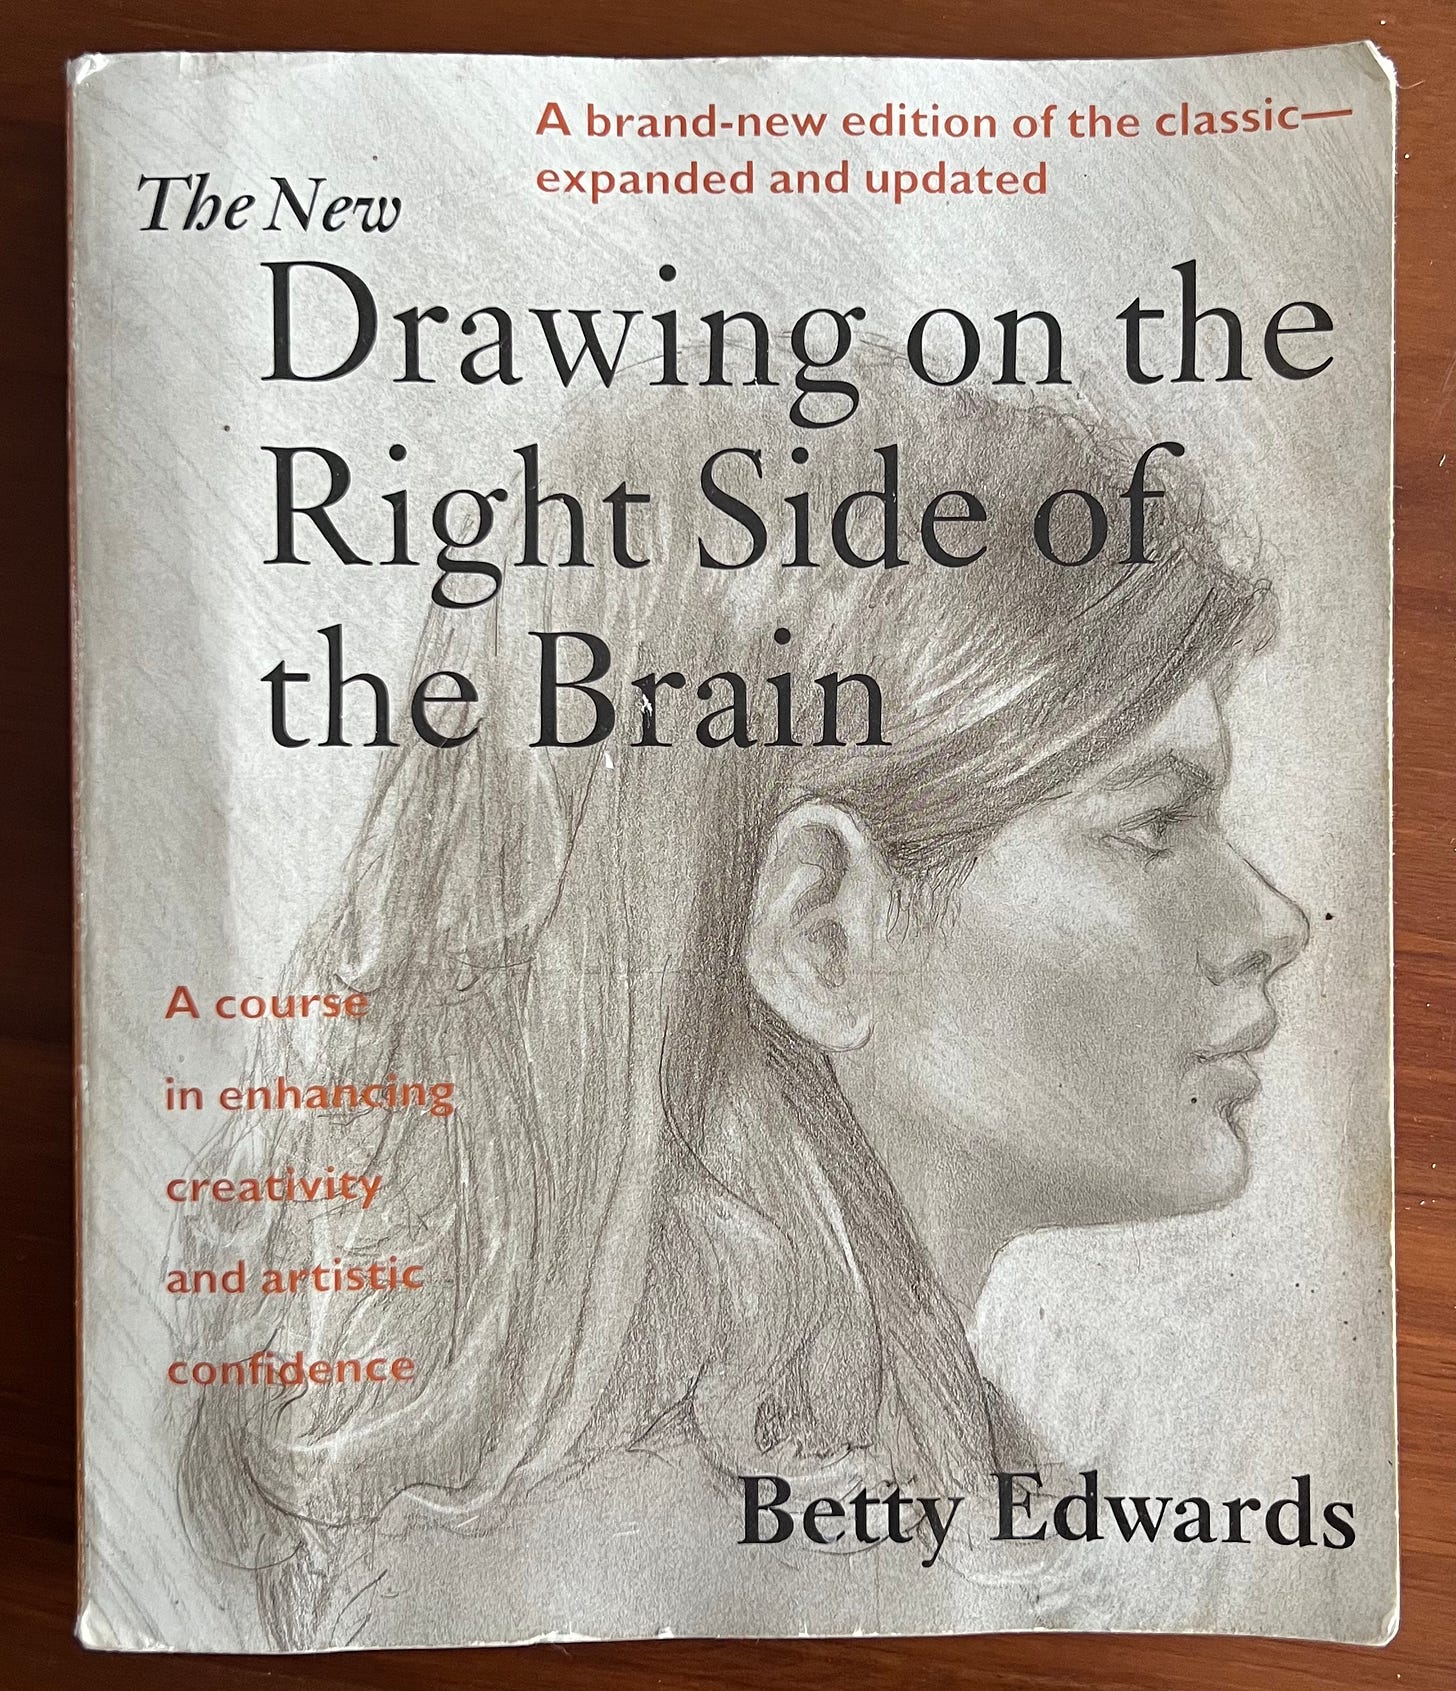 An image of the book "The New Drawing on the Right Side of the Brain"